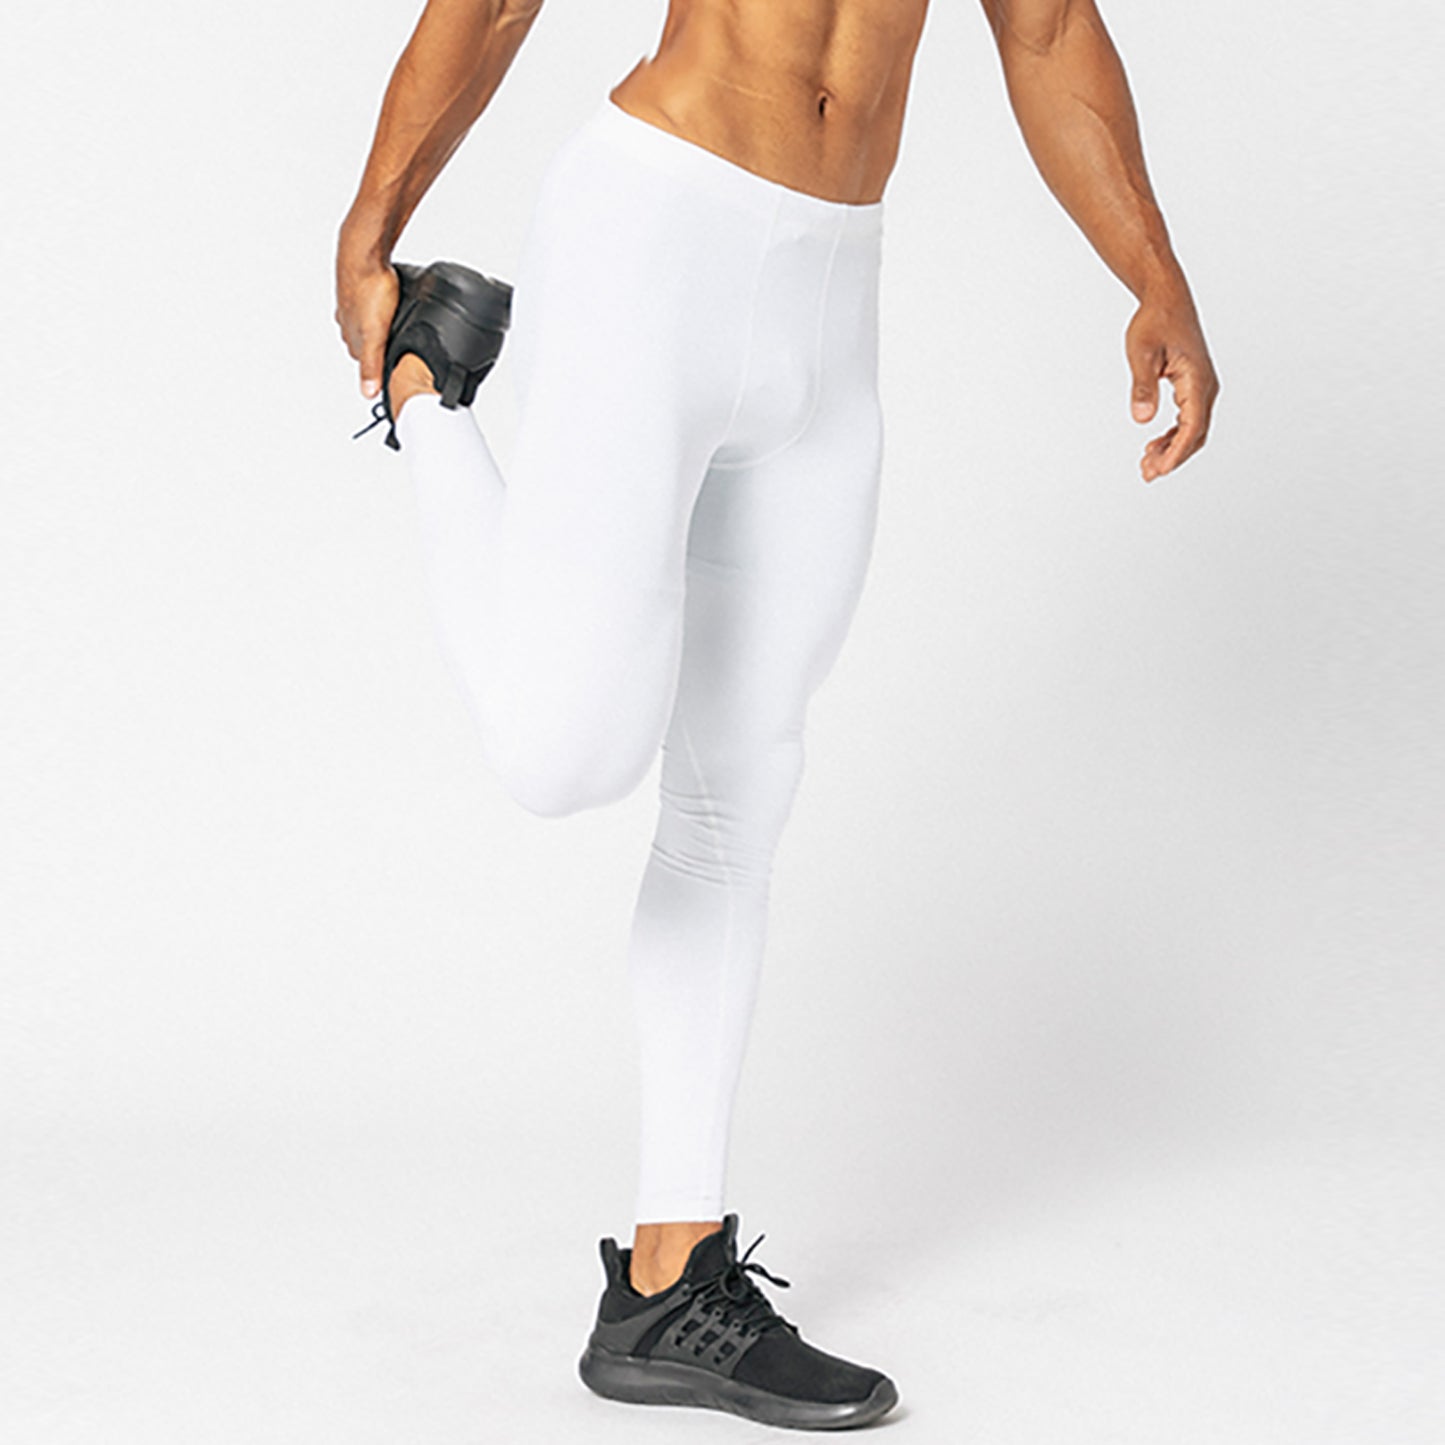 Xmarks Men's Compression Tights Running Pants Baselayer Legging White S 